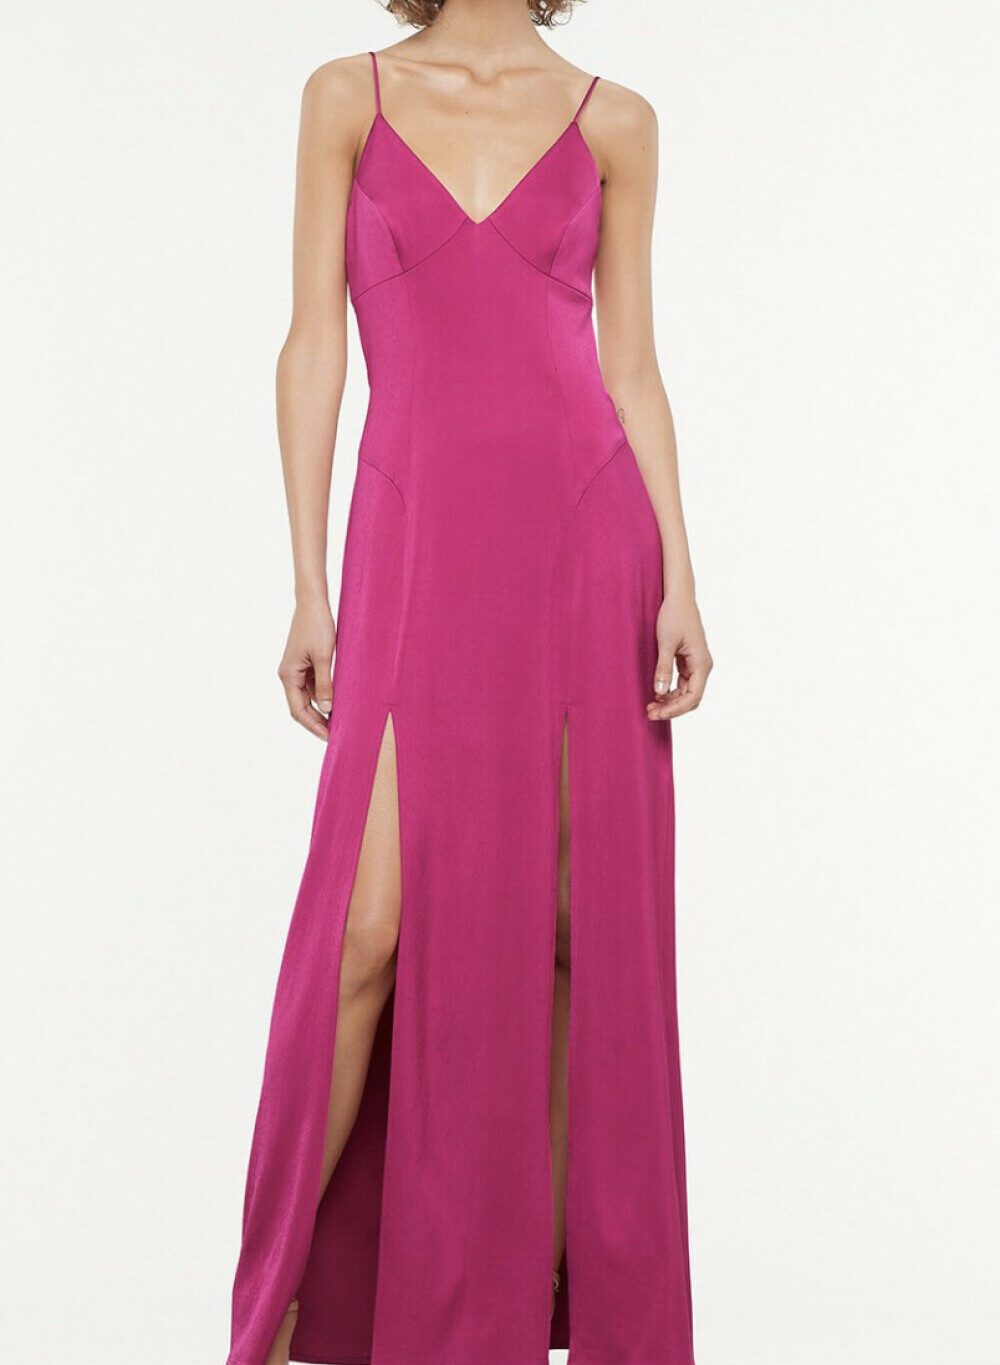 Manning Cartell Facetime Slip Dress in hot pink for hire.